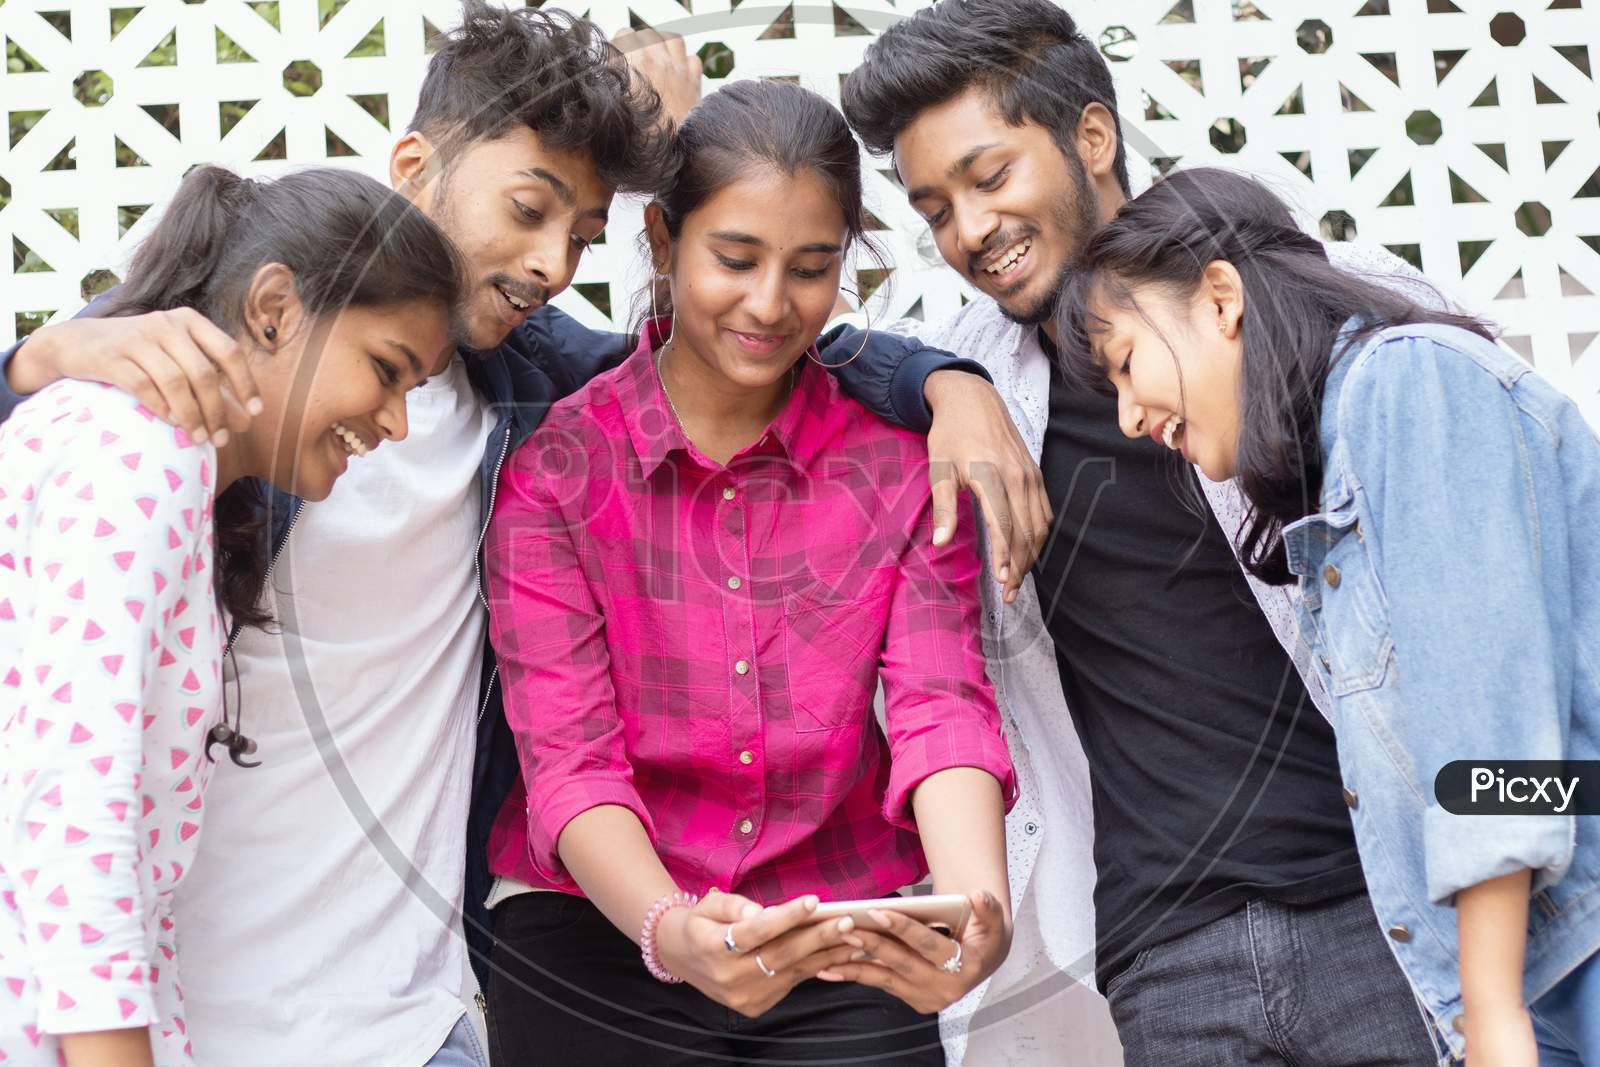 A Group of Happy Young People using a Mobile Phone or Smartphone At Outdoors